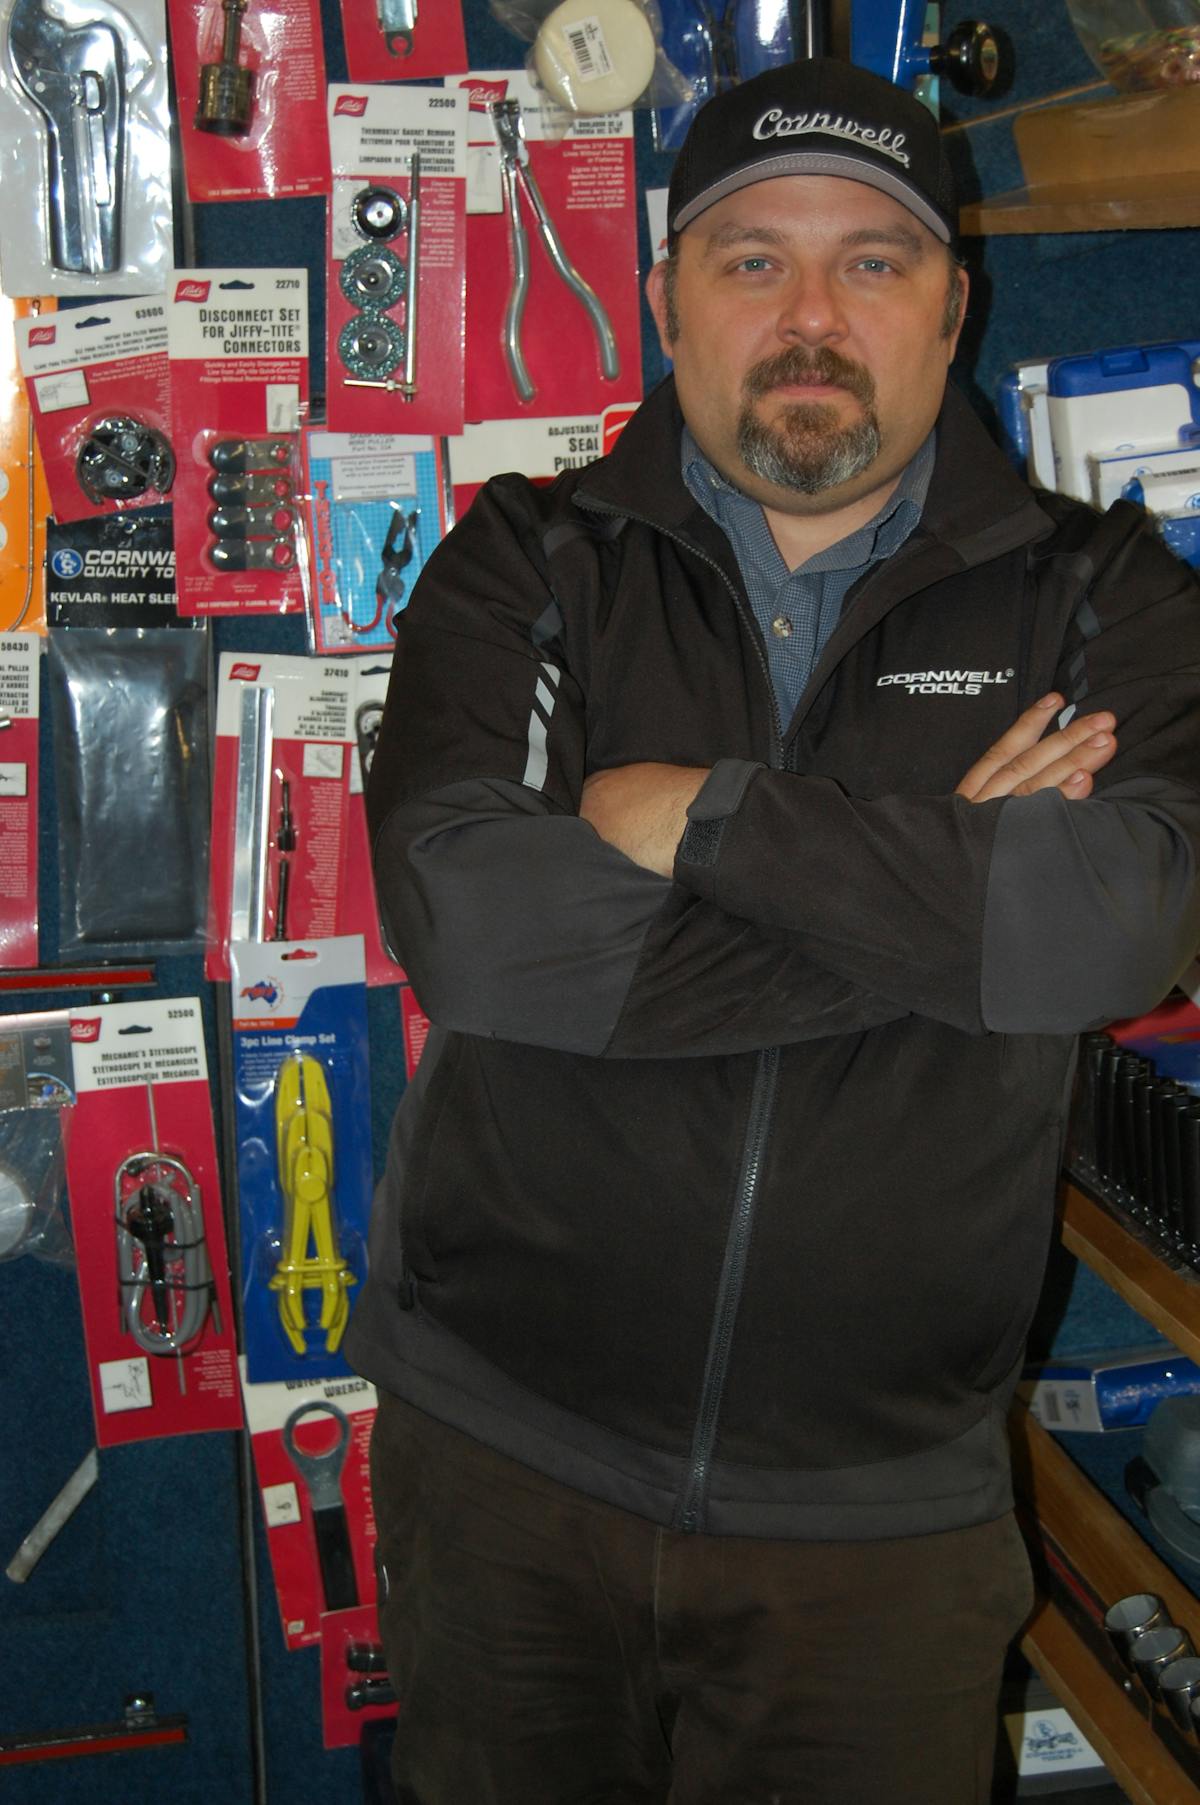 Baltimore-based Cornwell Tools dealer John Patterson got his start in 2007, after working 20 years as a diagnostic technician.